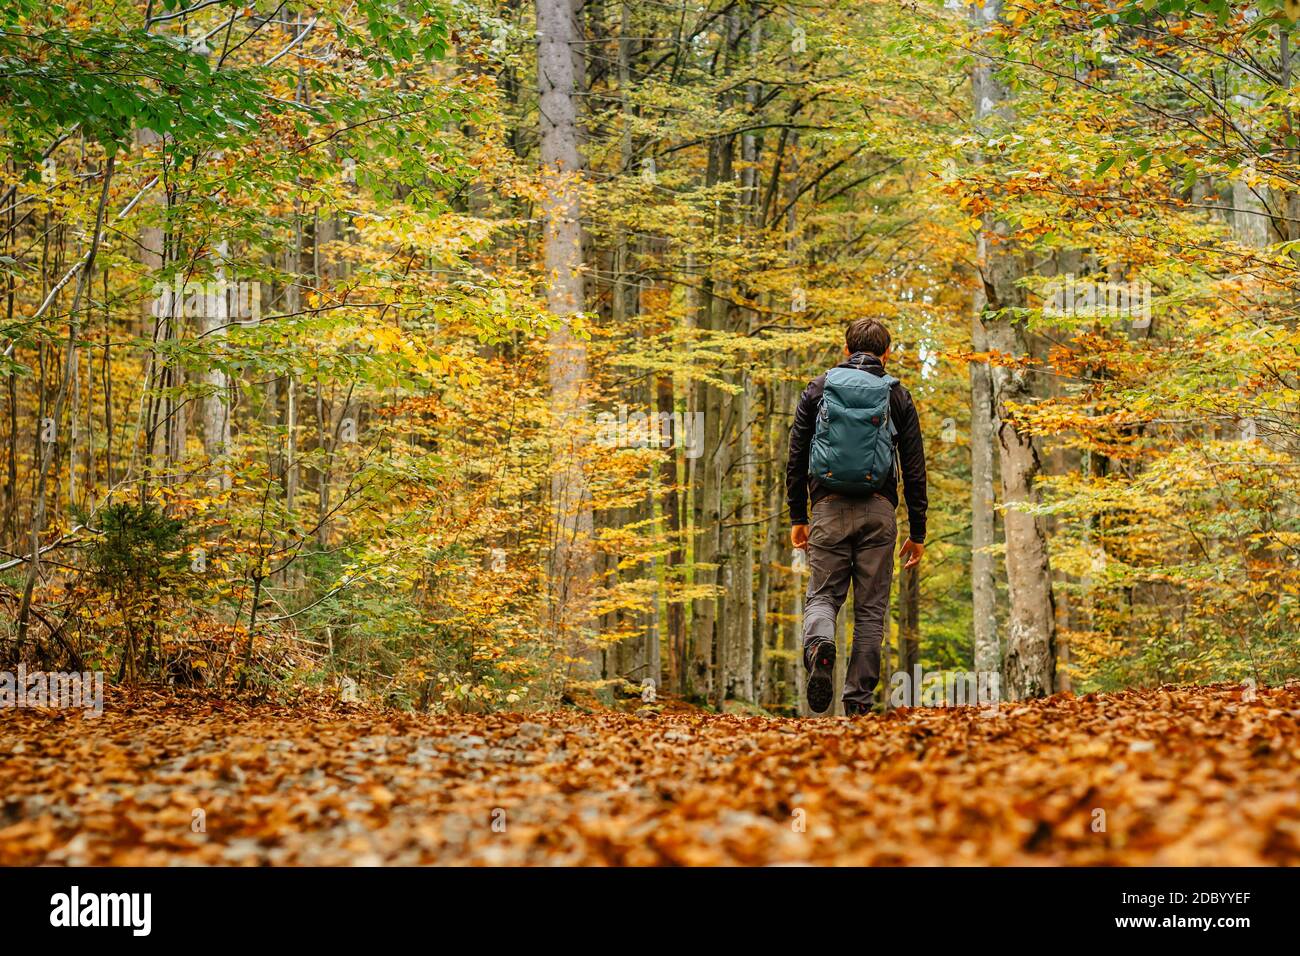 Lonely man walking in a forest path.Autumn season.Solo outdoor sport. Social distance. Active backpacker hiking in colorful nature. Warm sunny day Stock Photo